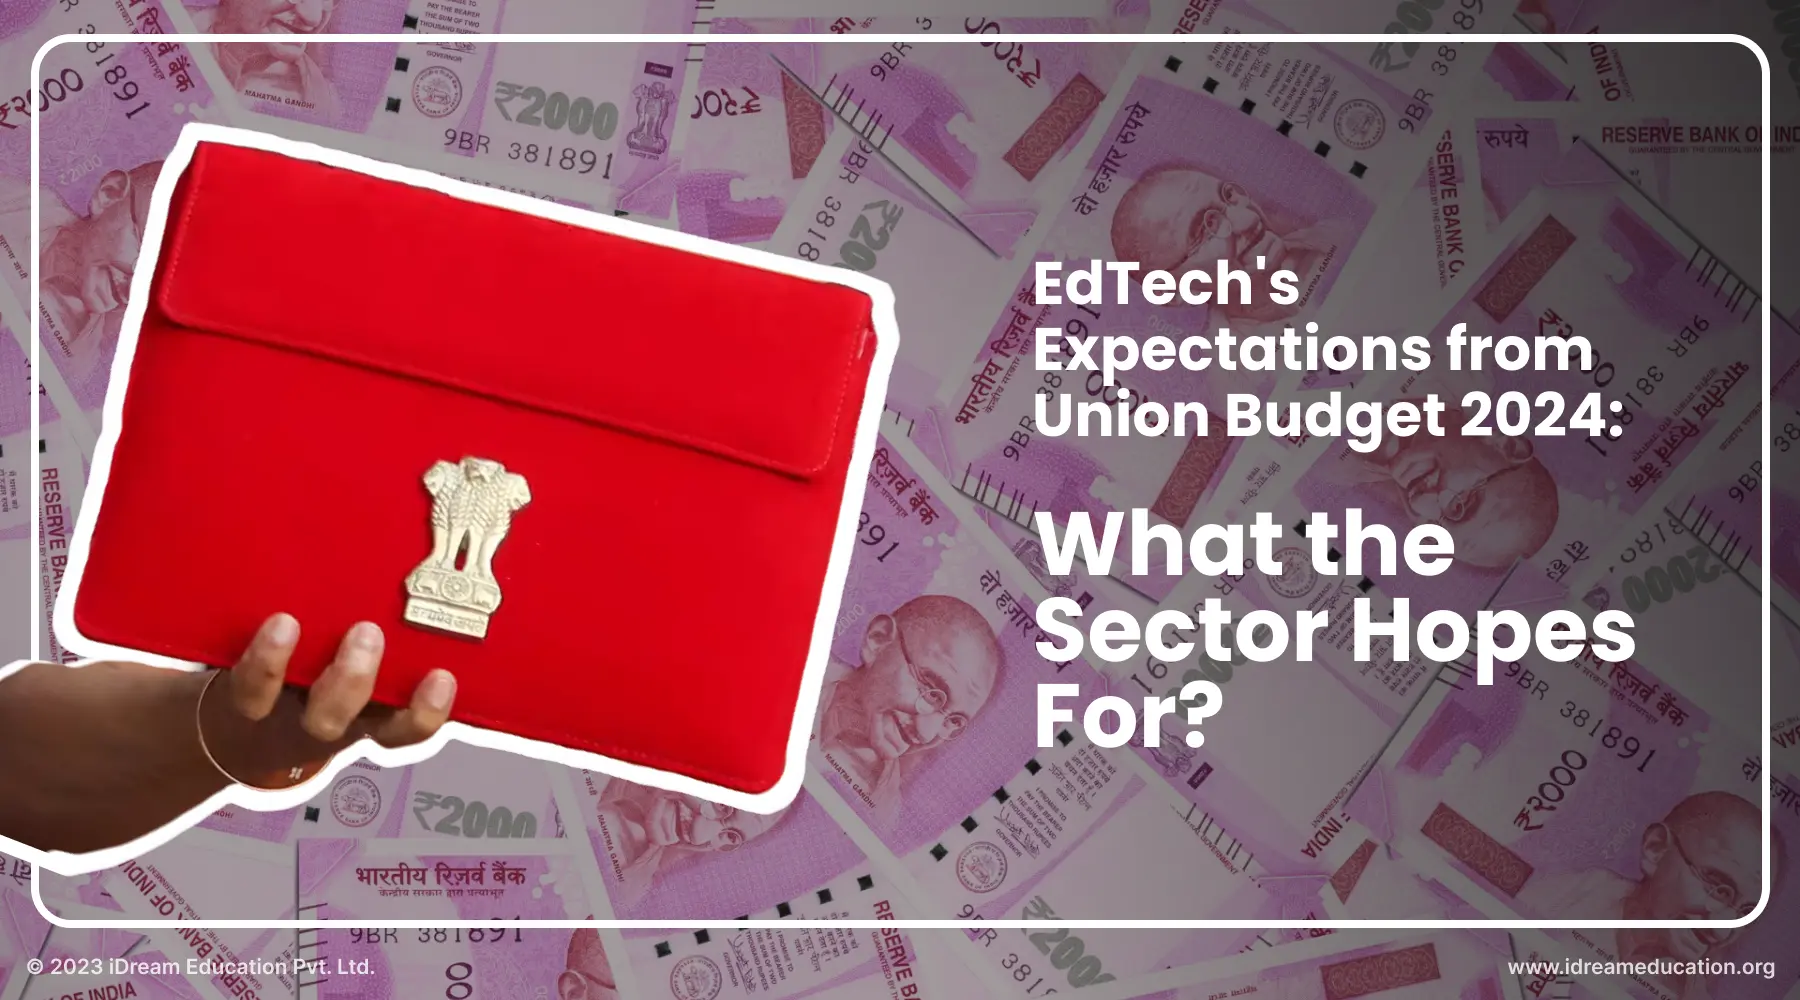 Cover Image guiding through the blog on EdTech's Expectations from Union Budget 2024, analyzed through the perspective of iDream Education